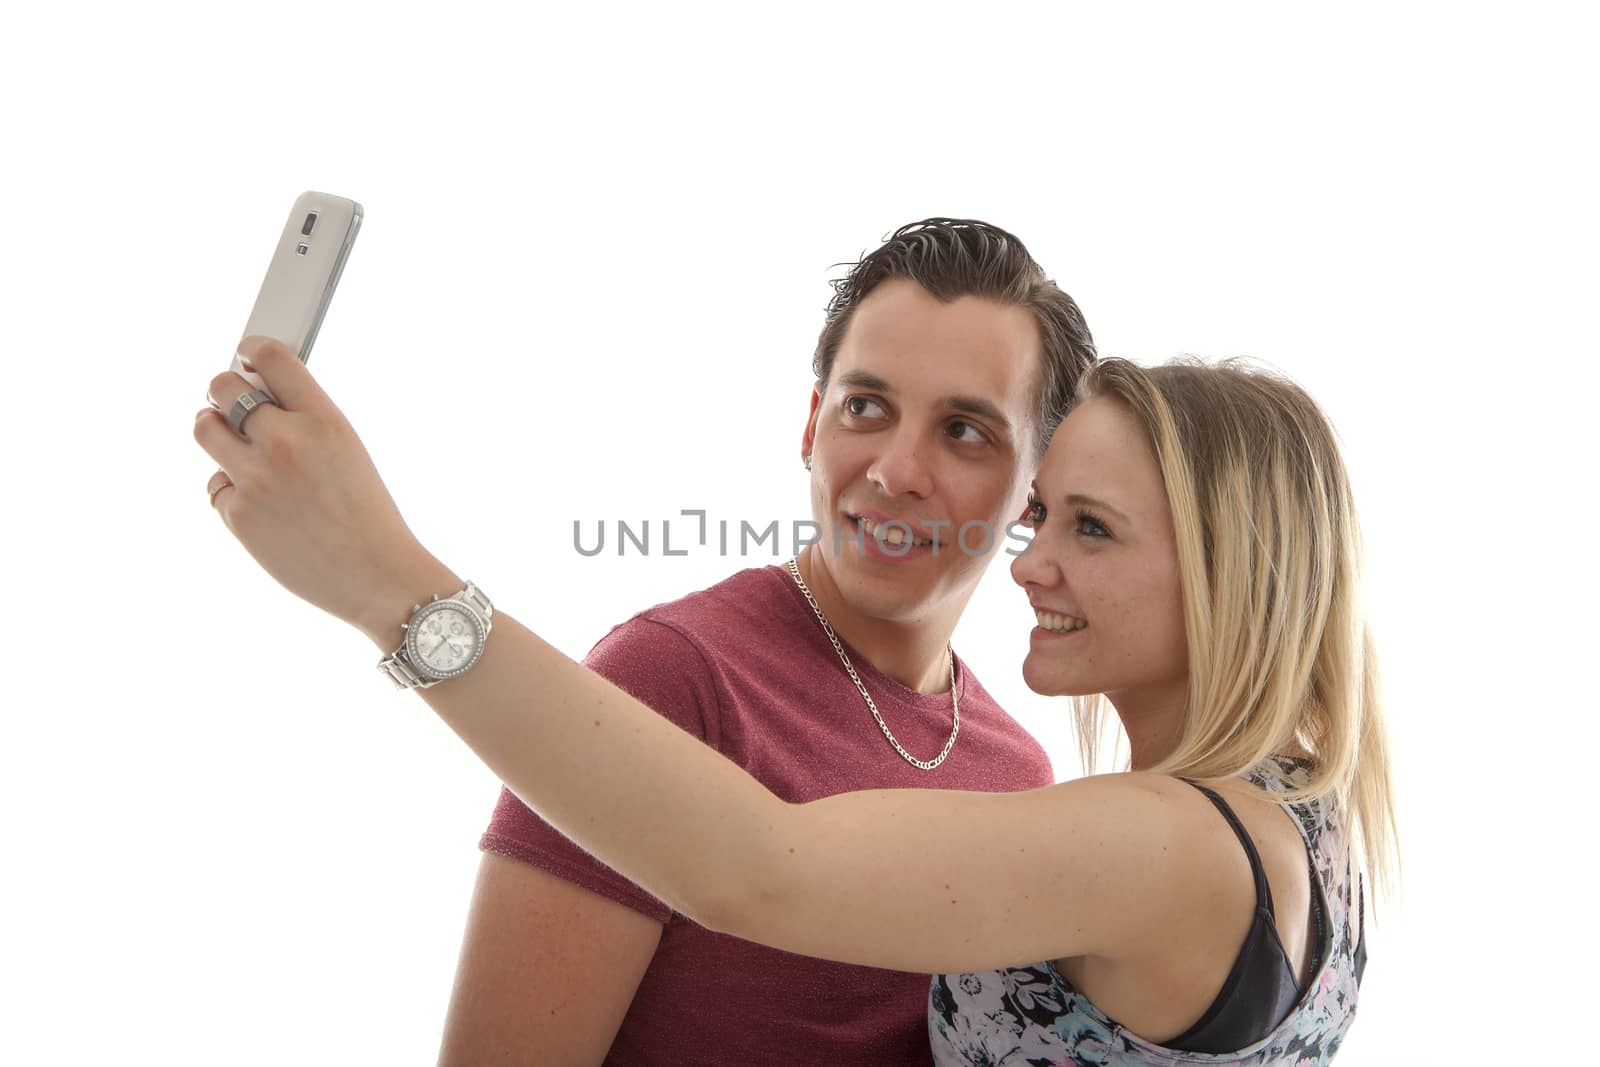 Young couple making selfie over white background